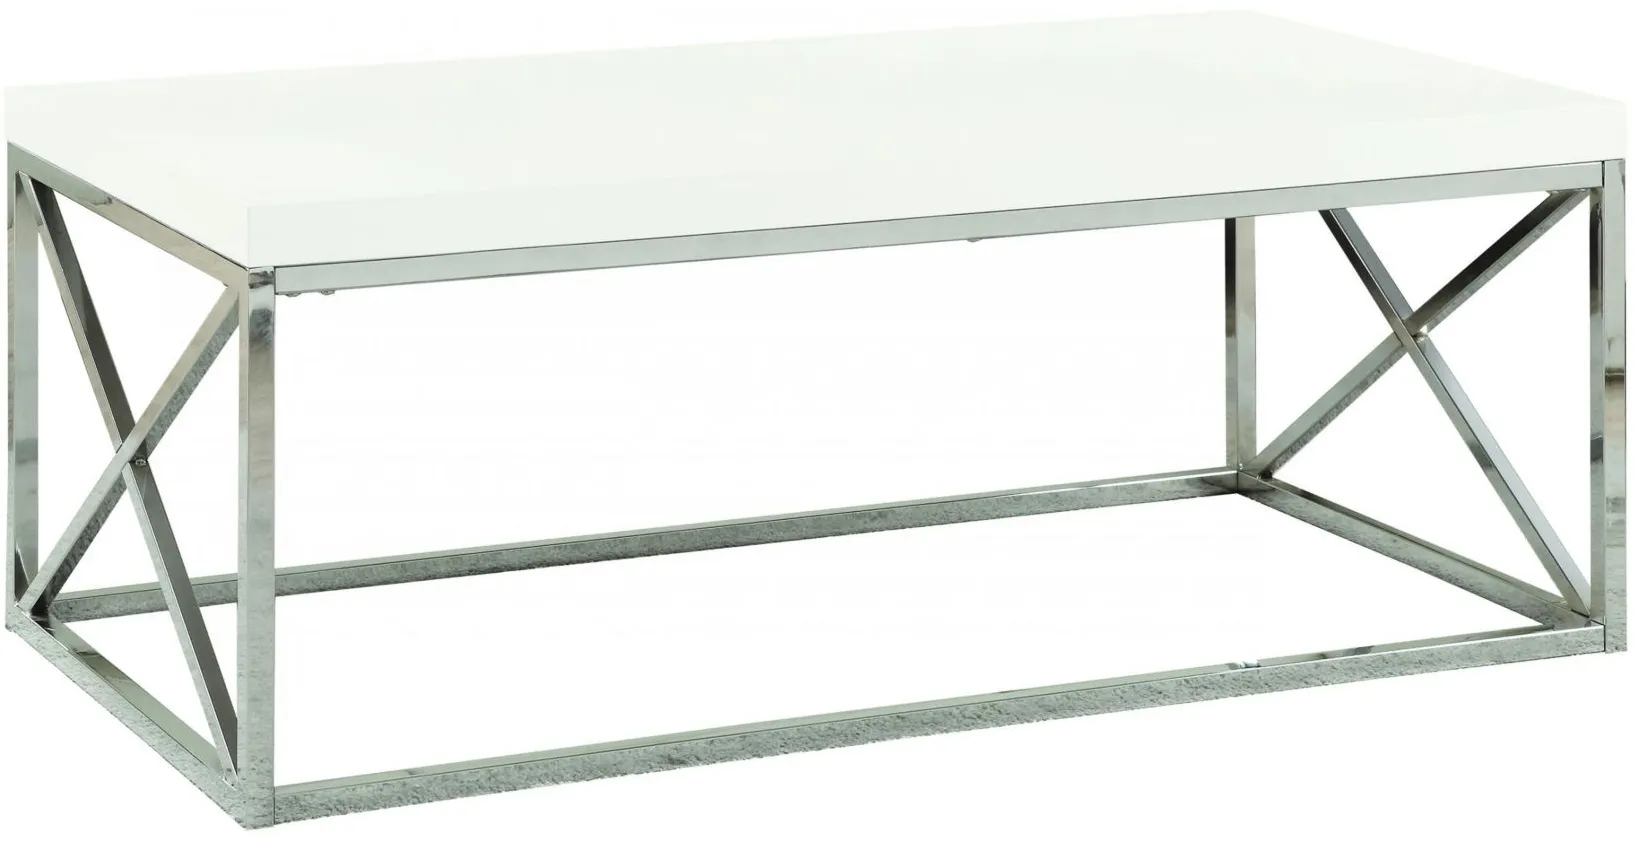 Haan Cocktail Table in Glossy White / Chrome by Monarch Specialties